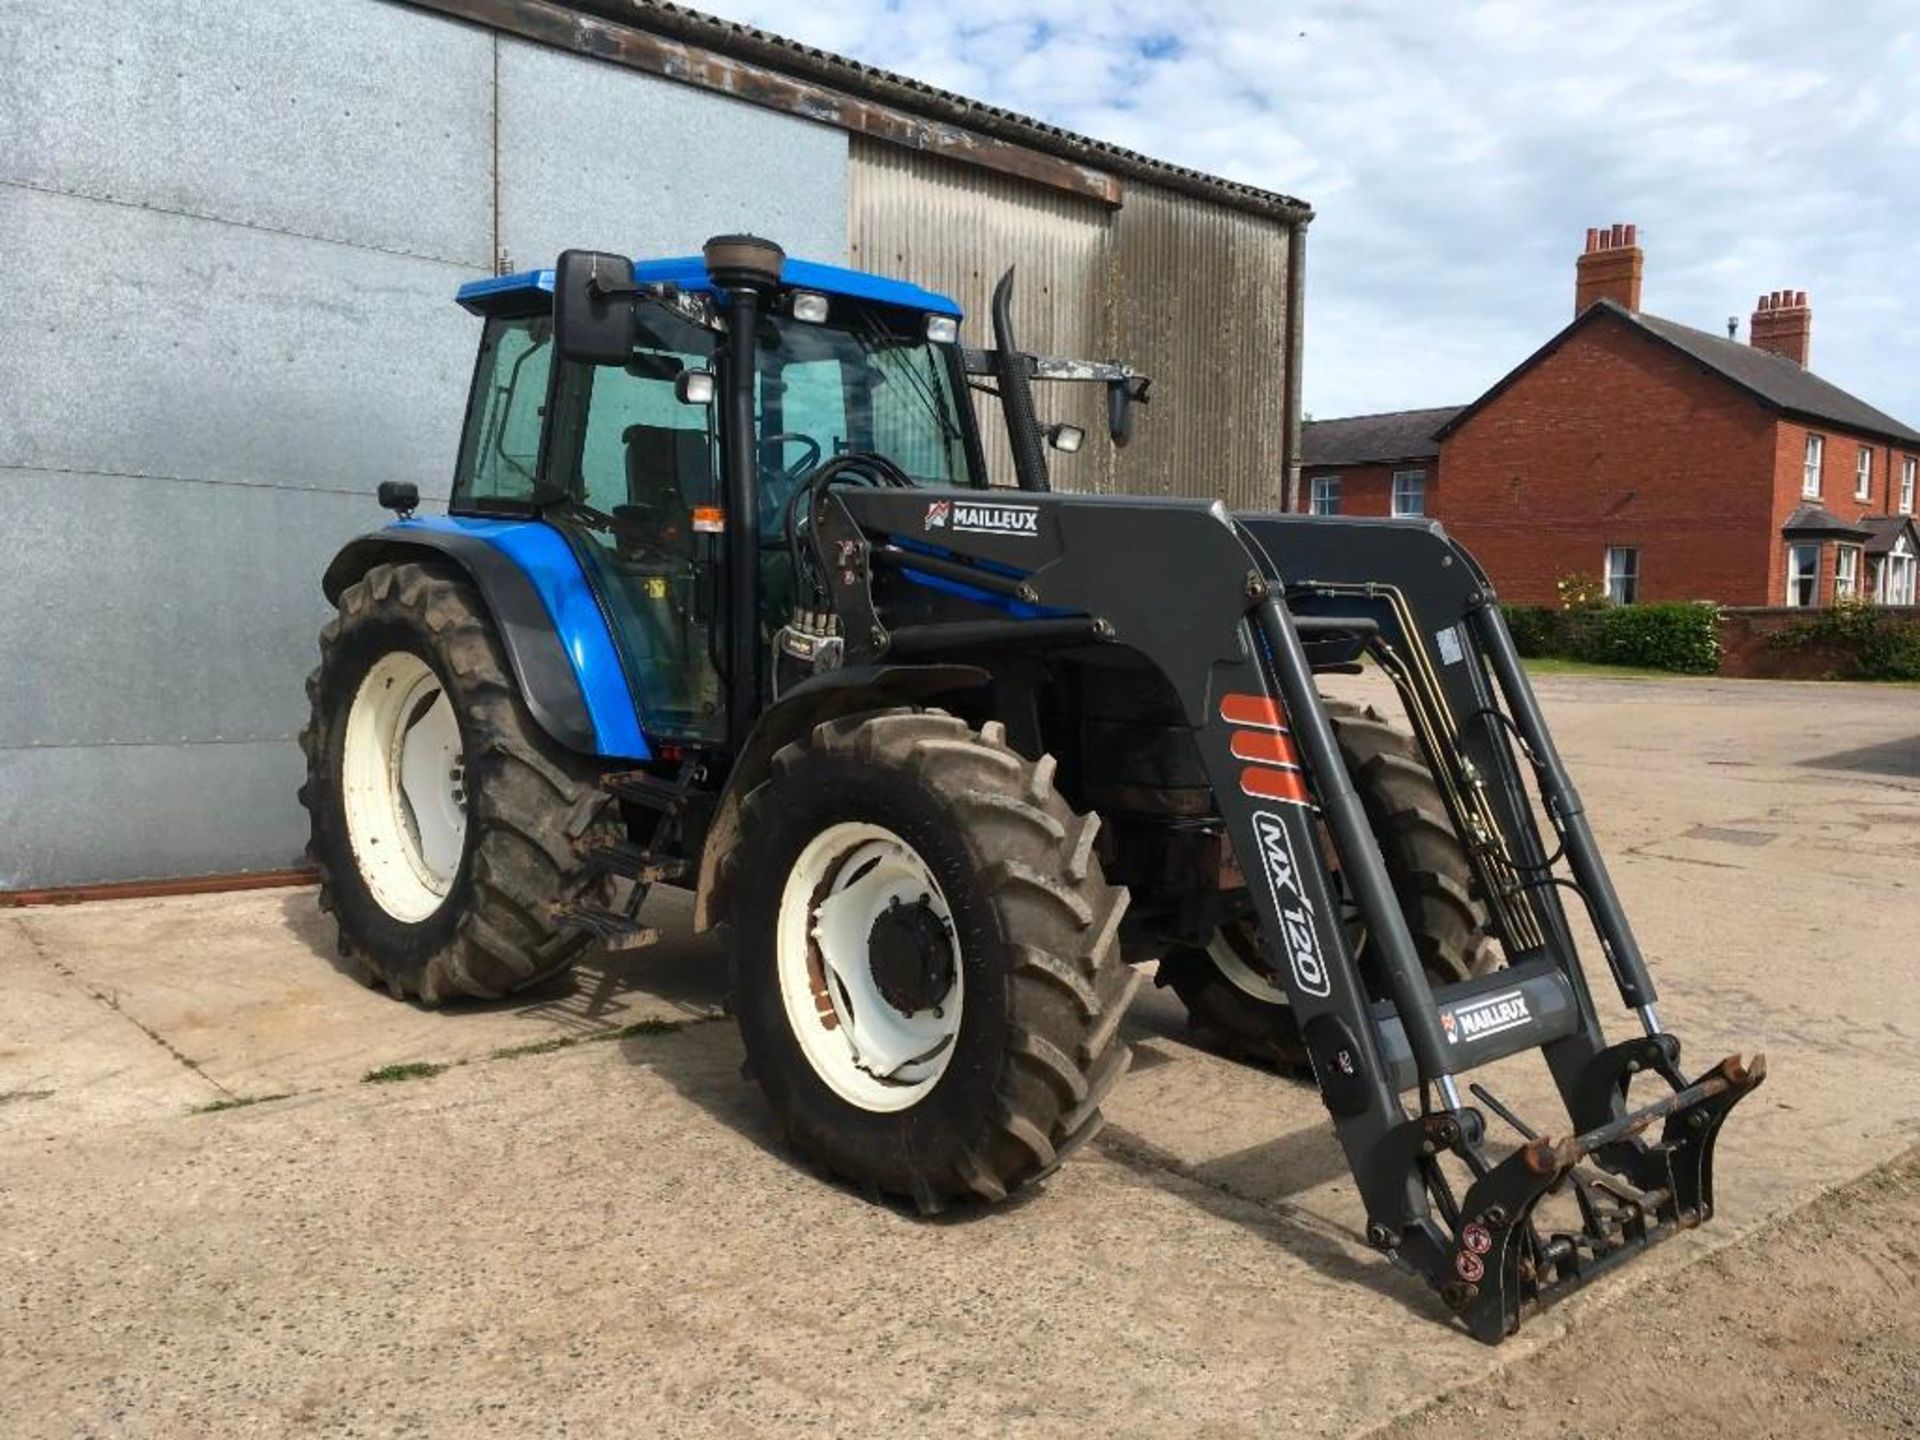 2003 New Holland TS115 tractor with Mailleux MX120 front loader. 2 spool valves, rear link arms and - Image 3 of 13